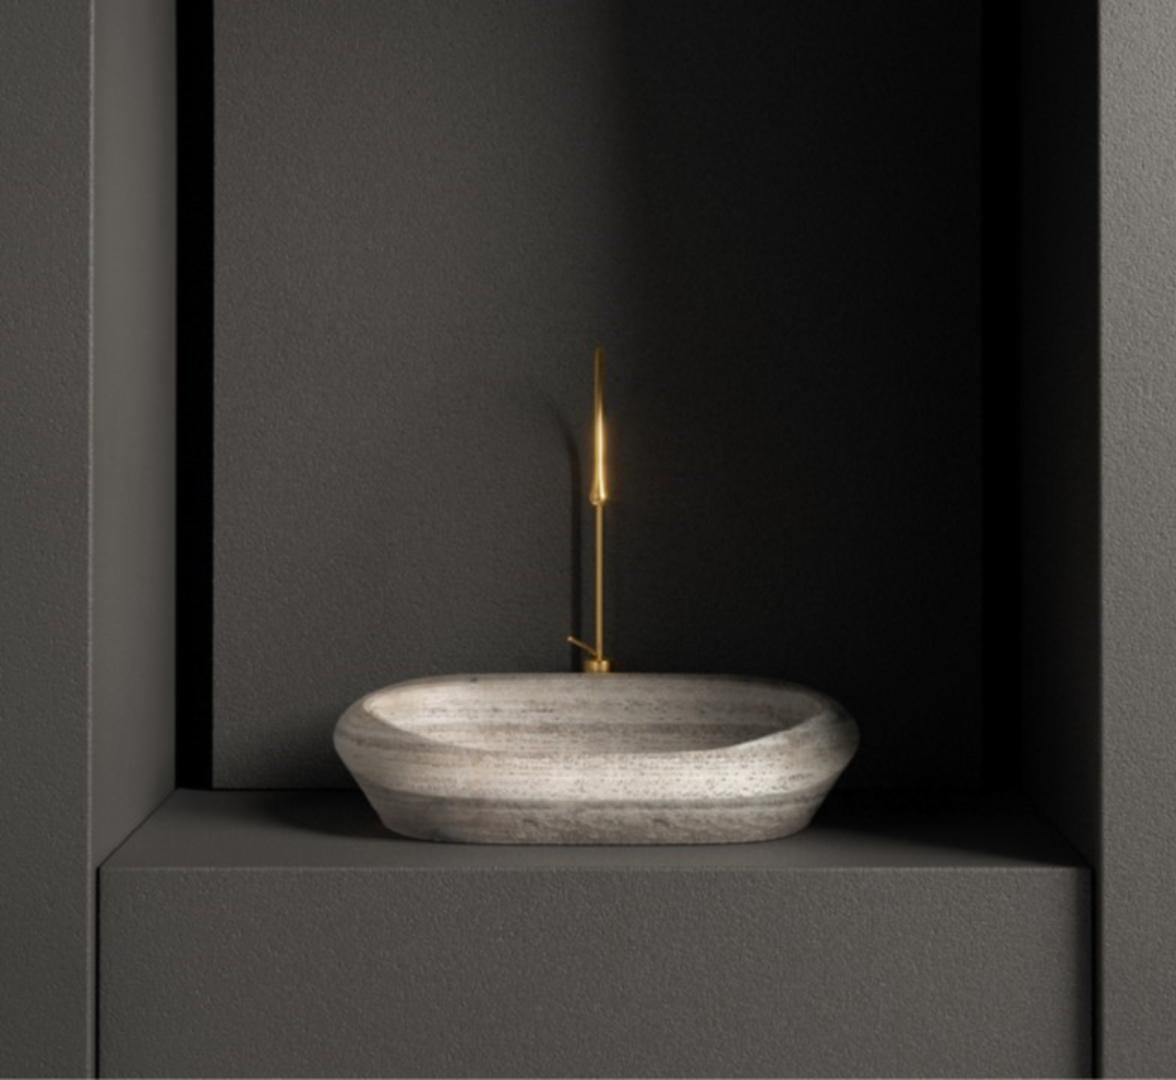 Small Travertino Silver Tosca Washbasin by Marmi Serafini
Materials: Travertino Silver marble.
Dimensions: D 44 x W 58 x H 17 cm
Available in other marbles.
Tap not included.

Tosca is a magnificent washbasin made of a single solid piece of